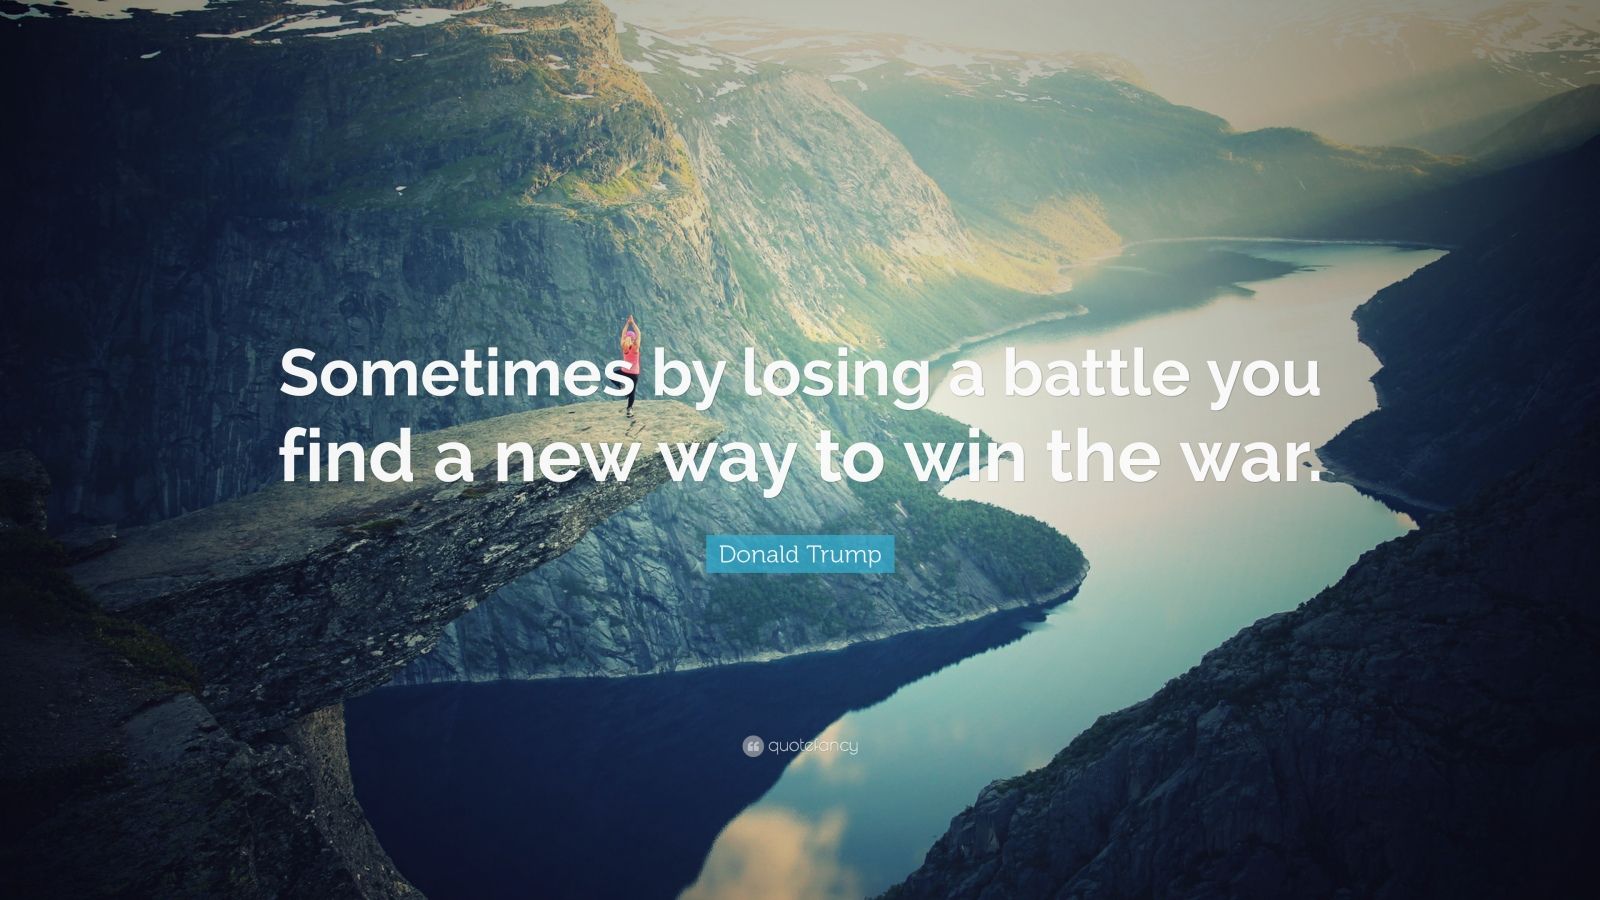 Donald Trump Quote: "Sometimes by losing a battle you find a new way to win the war." (25 ...